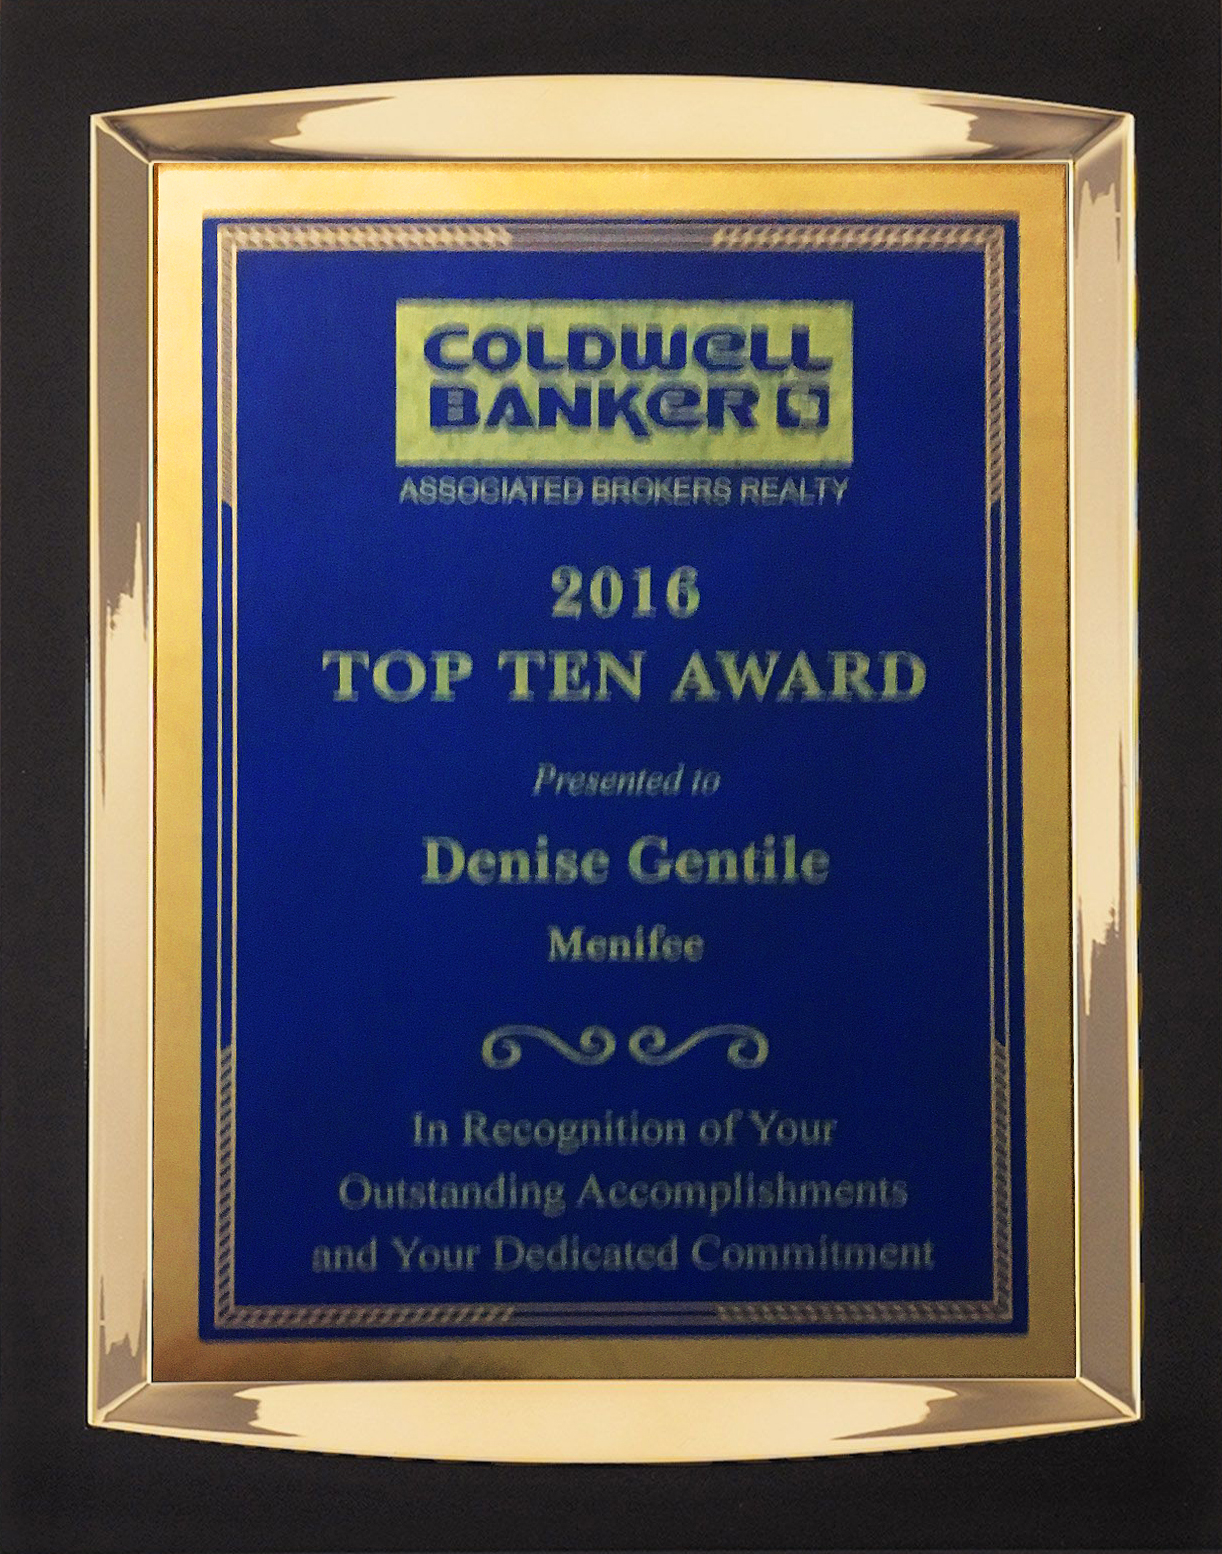 Denise Gentile, Realtor at Coldwell Banker Associated Brokers Realty 2016 Top 10 Award!